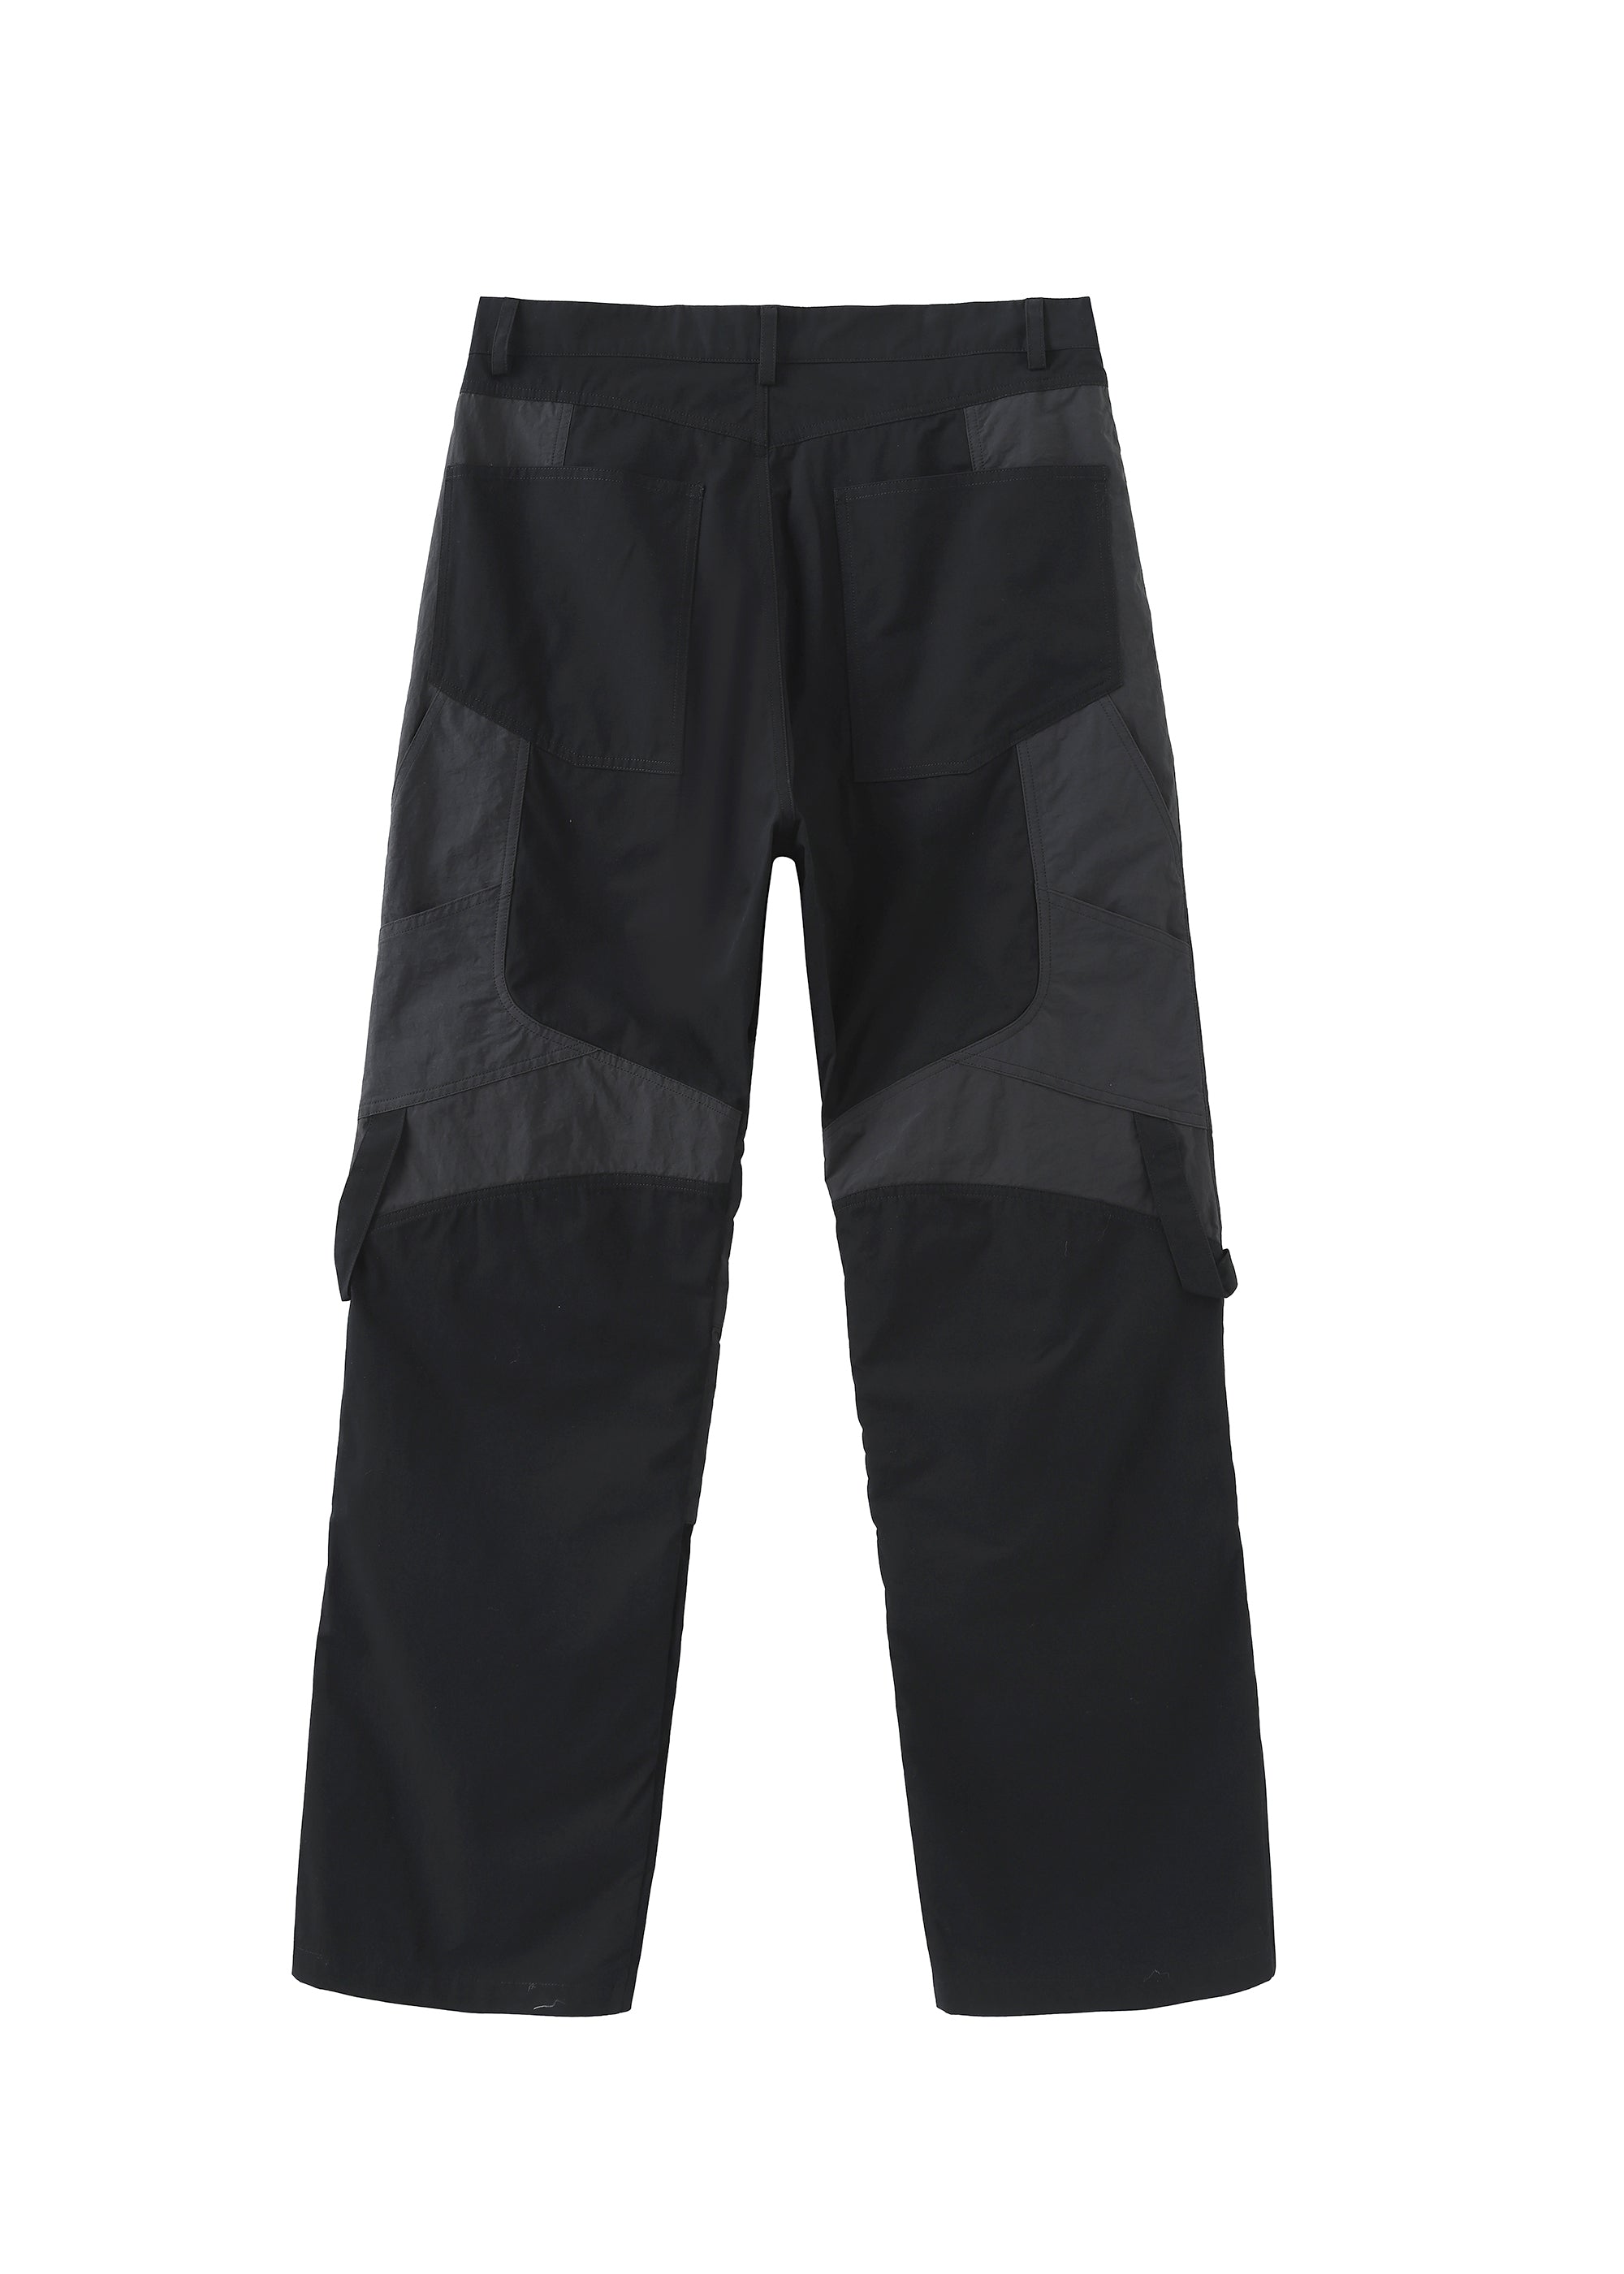 Articulated carpenters pants